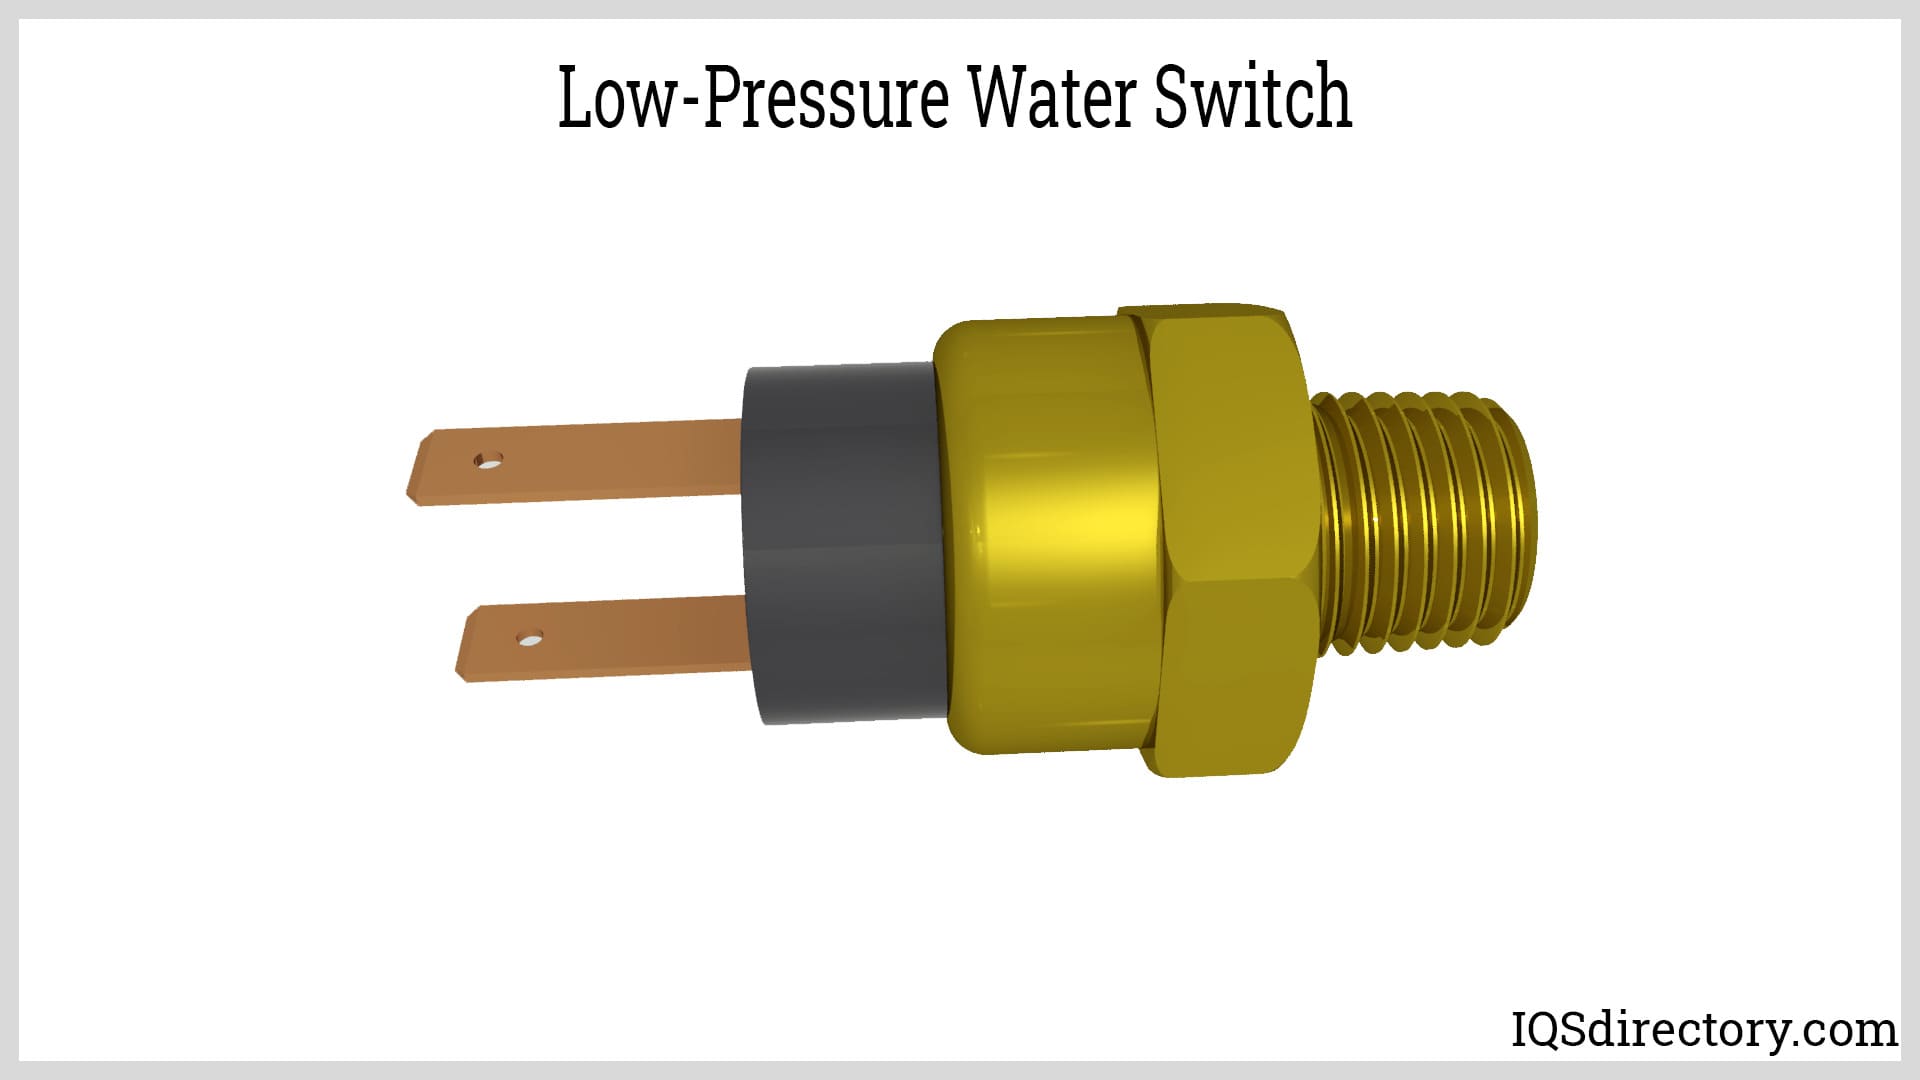 Low-Pressure Water Switch